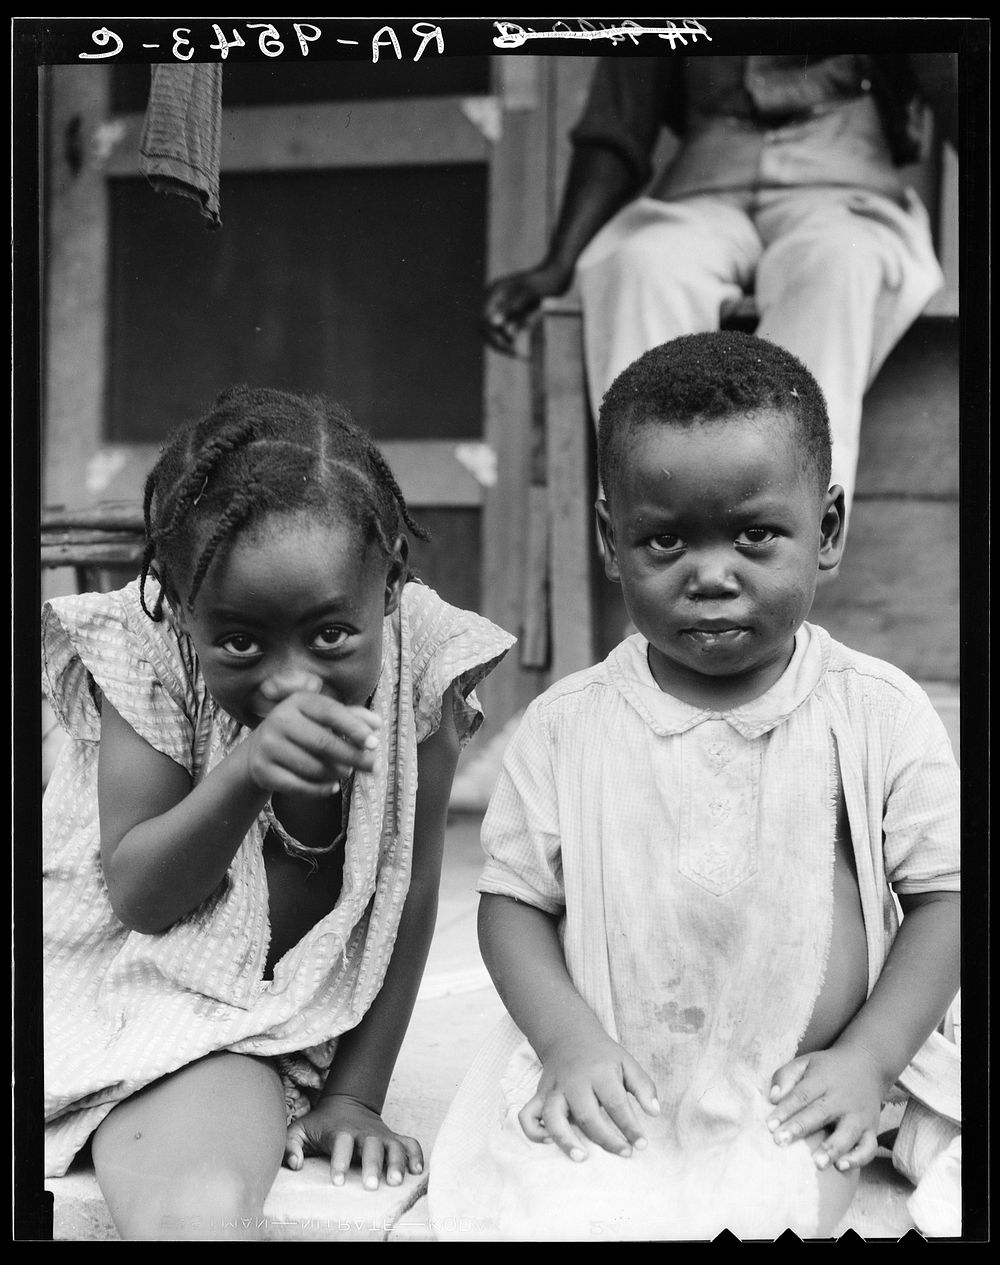 Children of evicted sharecropper, now living on Sherwood Eddy cooperative plantation by Dorothea Lange